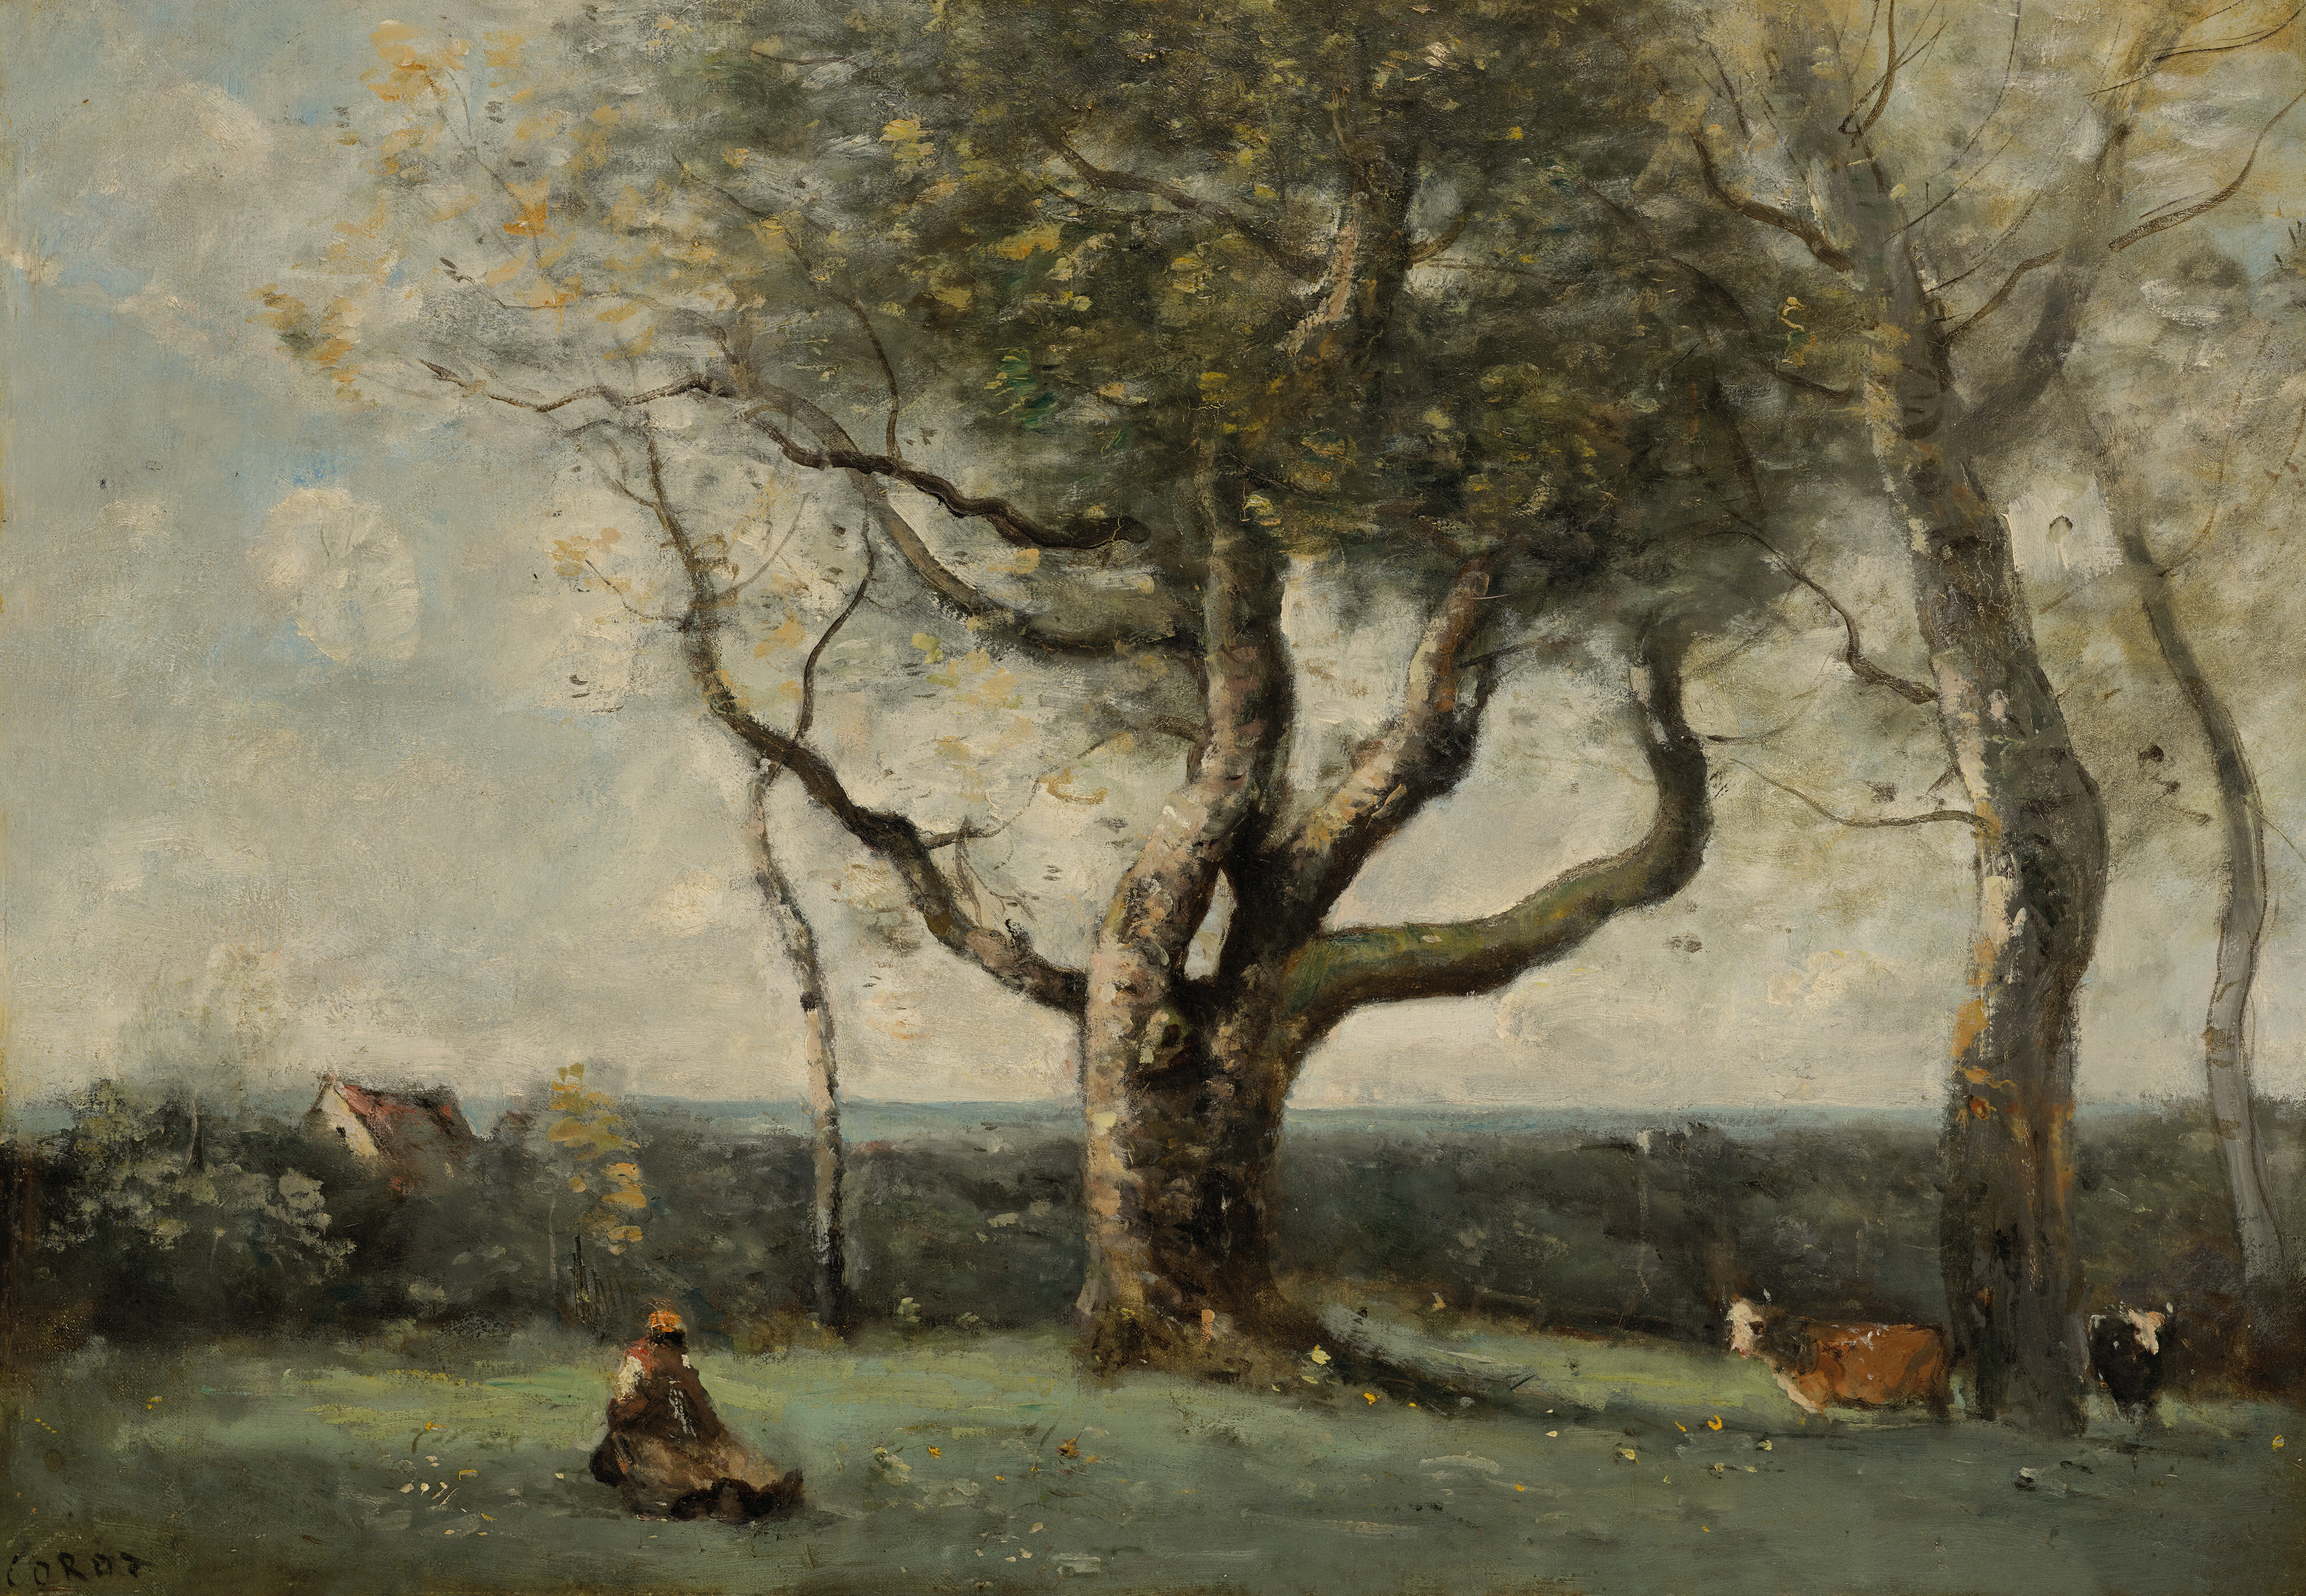 JEAN-BAPTISTE CAMILLE COROT (1796-1875) Le gros arbre (environs de Gournay) signed ‘COROT’ (lower left) oil on canvas 15 x 22 in. (38.1 x 55.8 cm.) Painted in 1865-1870 $200,000-300,000